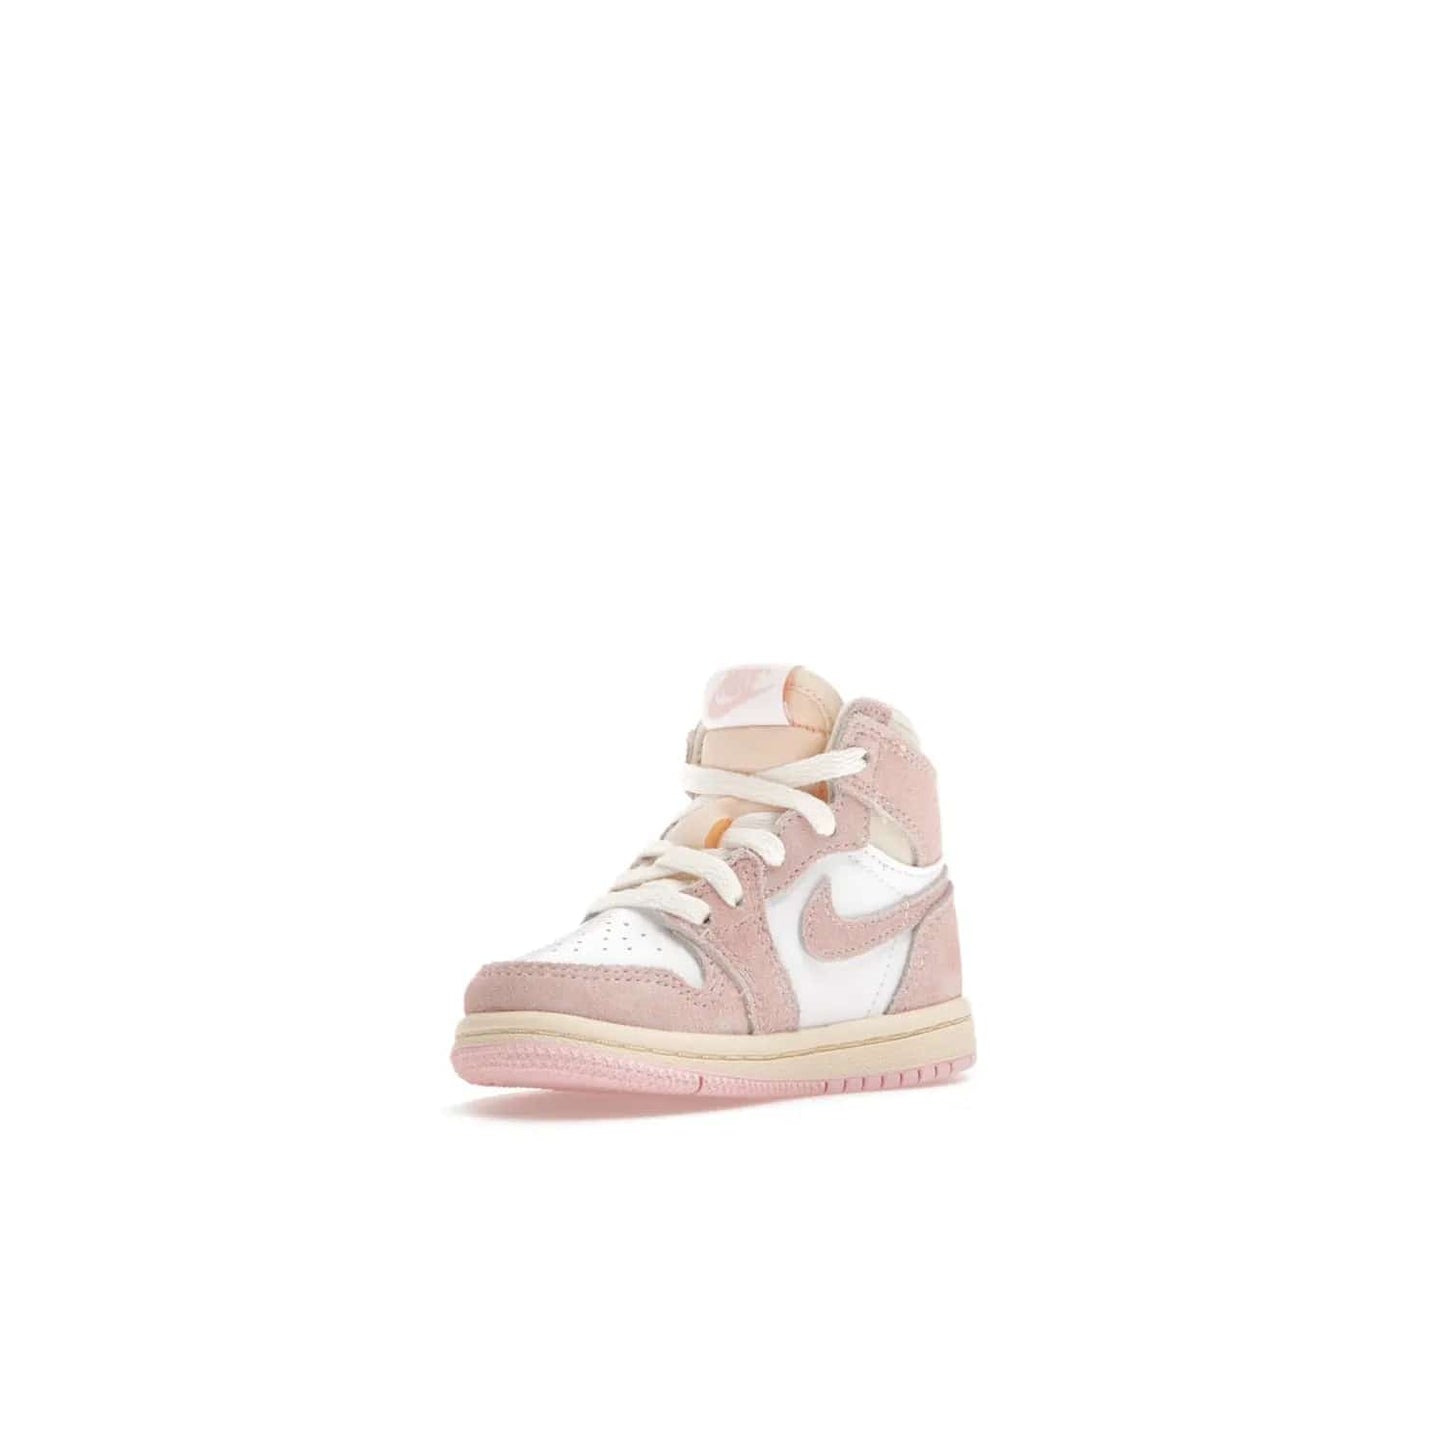 Jordan 1 Retro High OG Washed Pink (TD) - Image 15 - Only at www.BallersClubKickz.com - Retro style meets modern comfort: Introducing the Jordan 1 High OG Washed Pink (TD). Combining Atmosphere/White/Muslin/Sail colors with a high-rise silhouette, these shoes will be an instant classic when they release April 22, 2023.